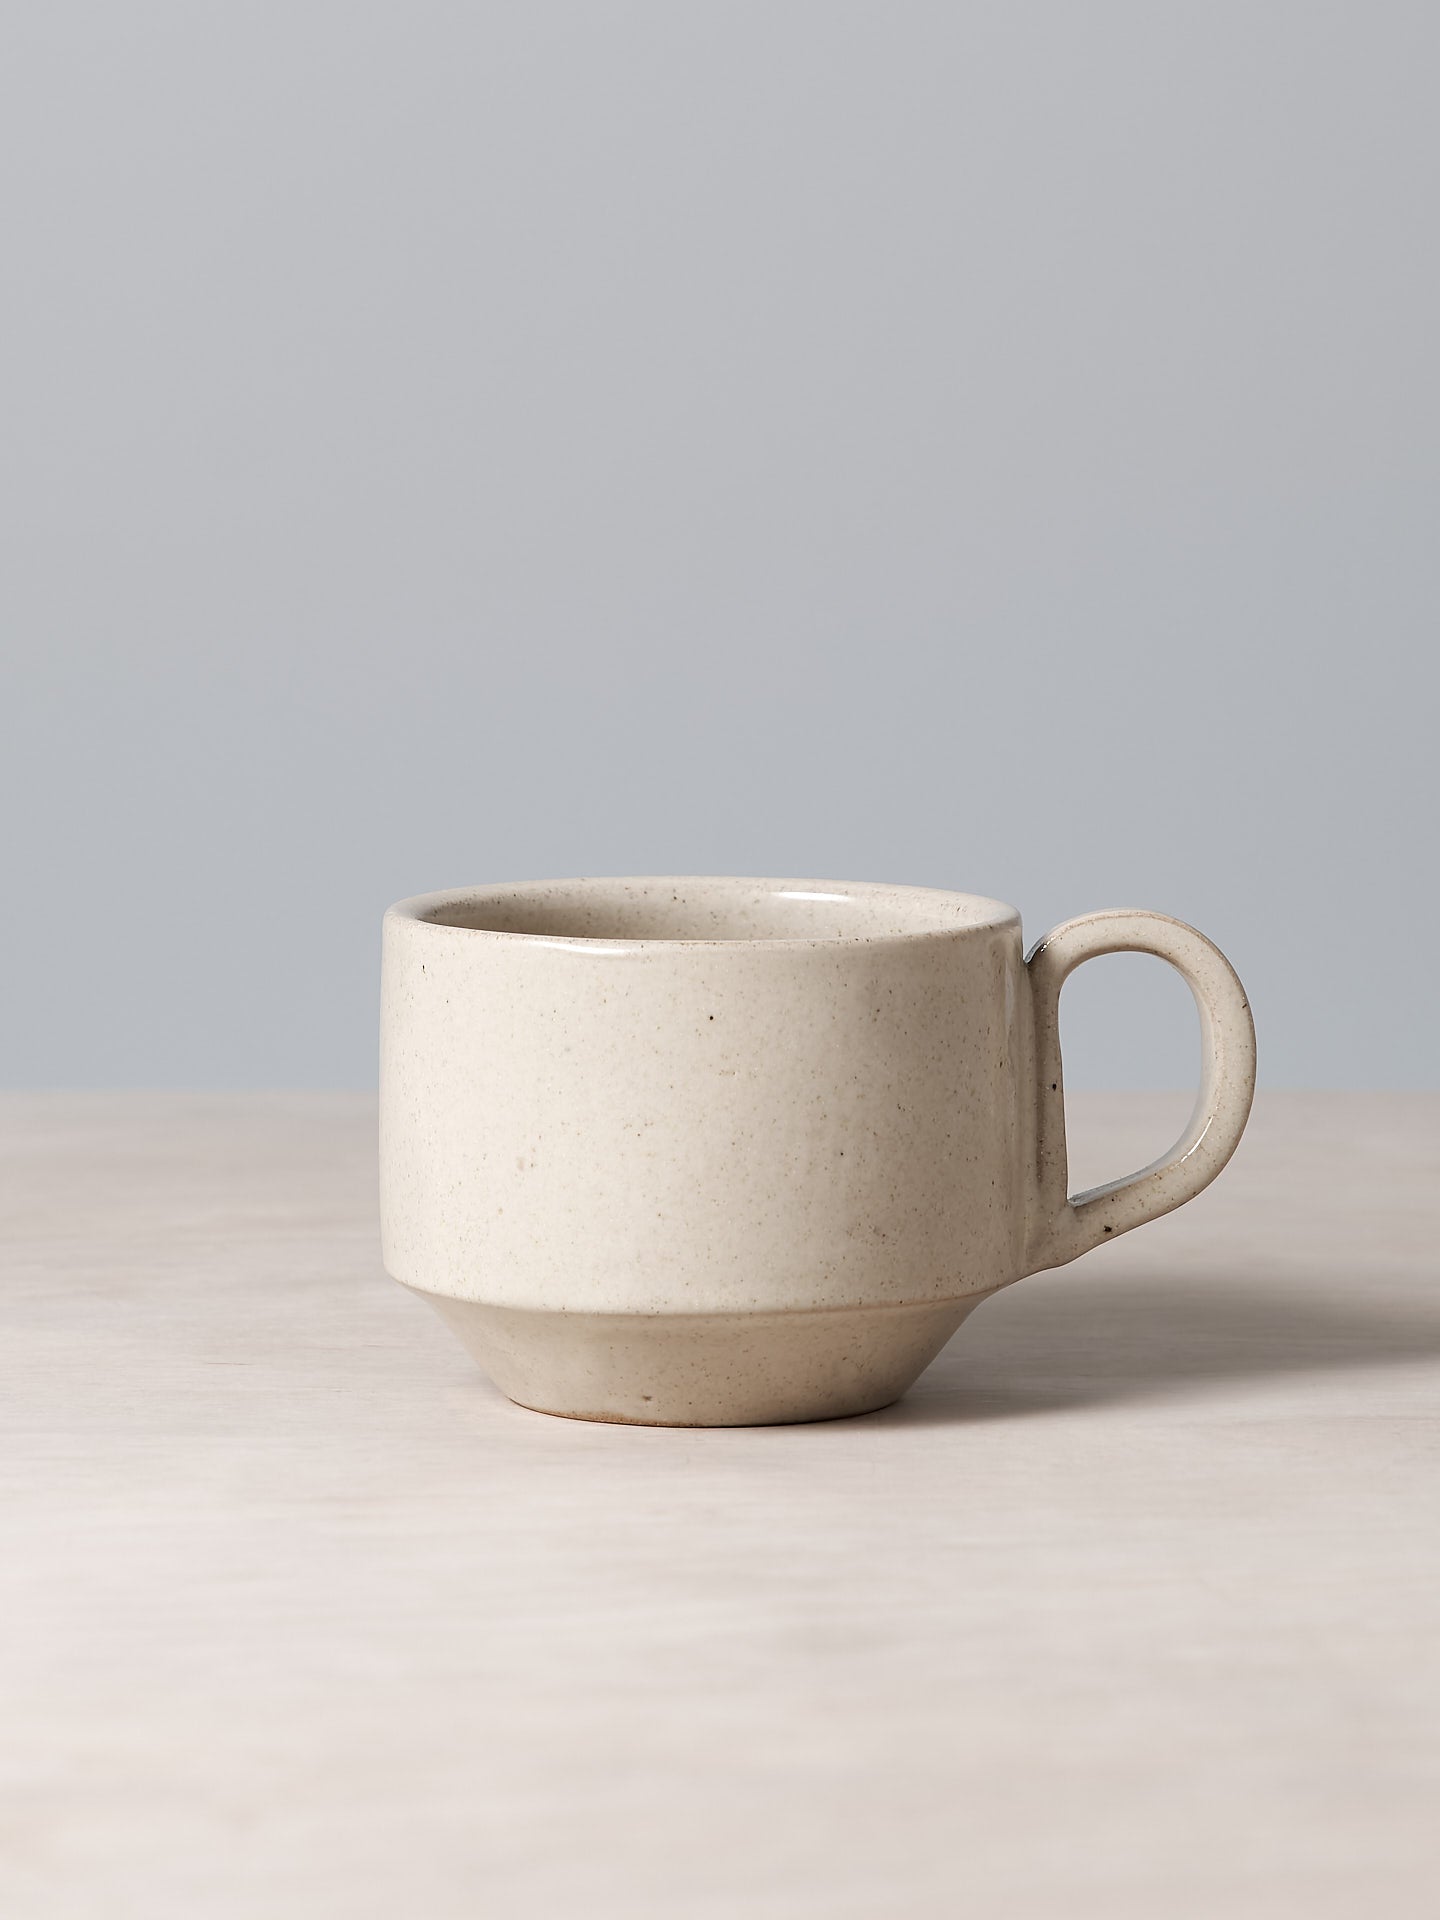 A Medium Stacking Mug – Beige from Richard Beauchamp sitting on top of a table.